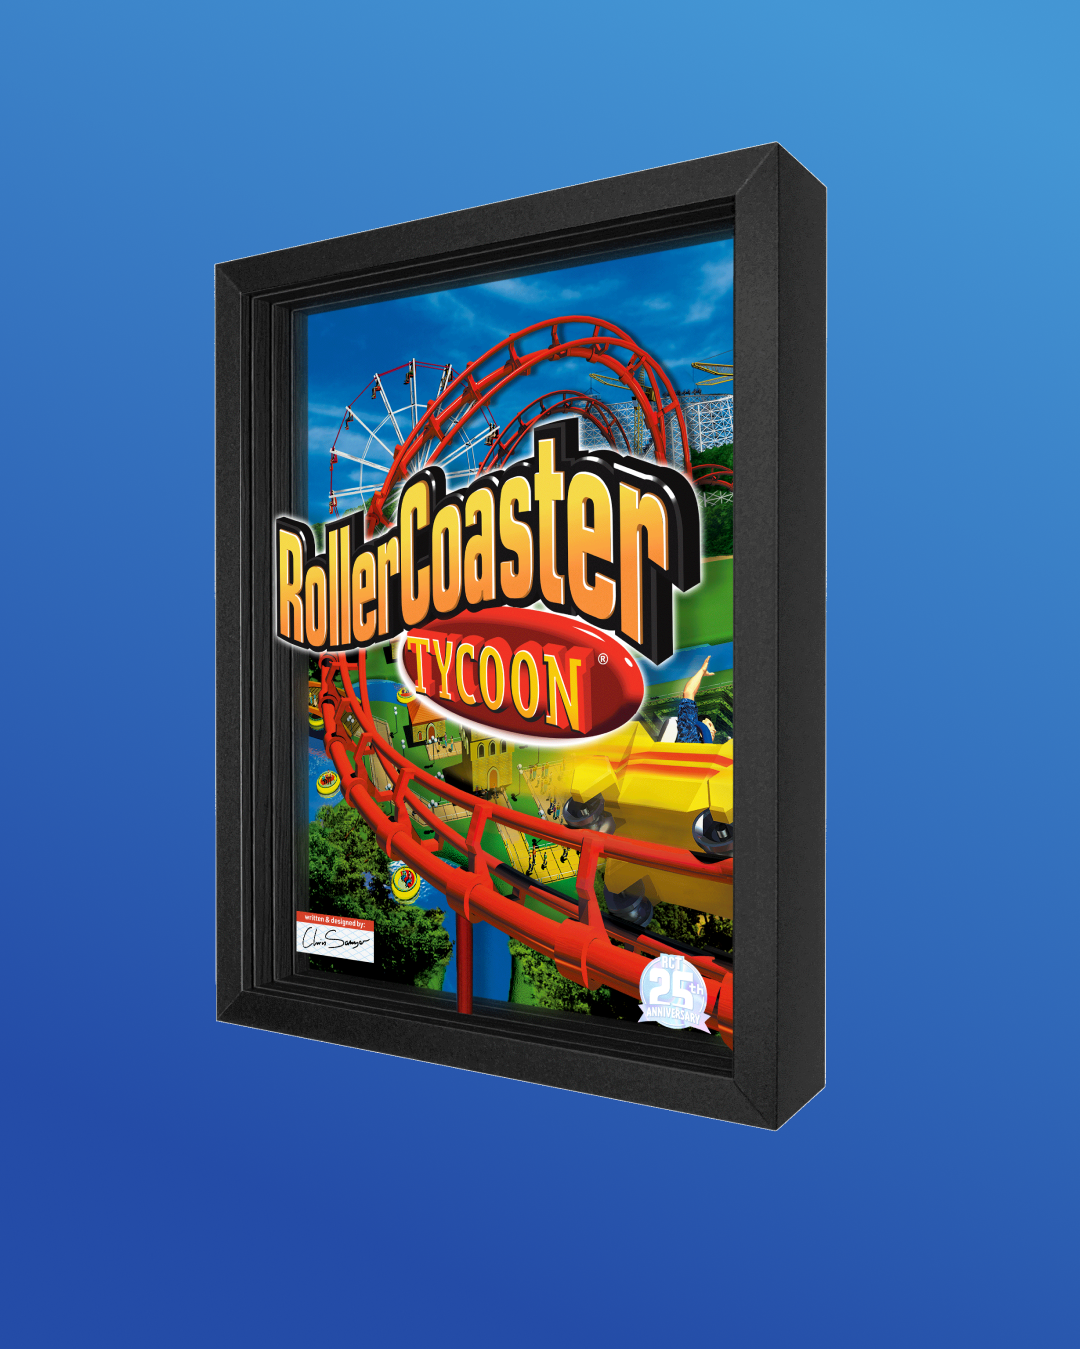 RollerCoaster Tycoon Shadowbox Art signed by Chris Sawyer.